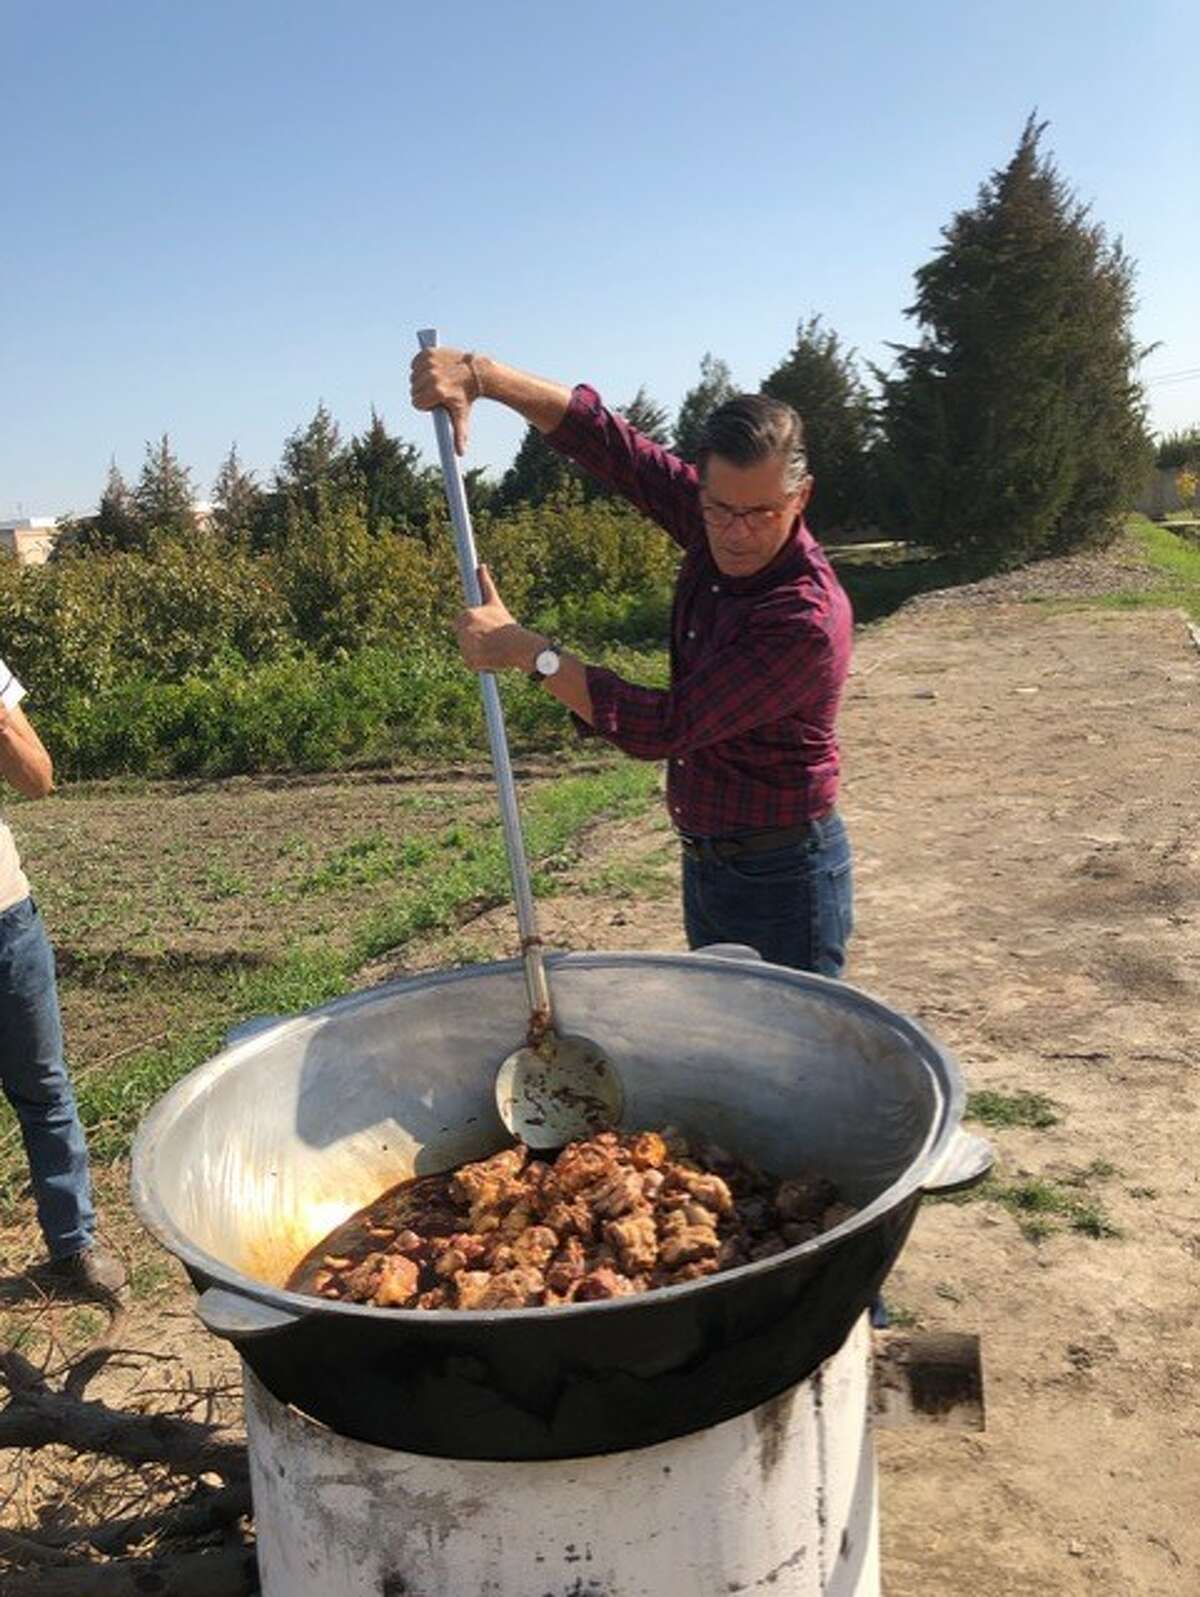 Foodie author Stephen Henderson has visited soup kitchens in Israel, Iran, Europe and all over America to figure out how to feed crowds cheaply but deliciously. Here, he works on a feast of roasted lamb for impoverished farmers in Uzbekistan. He calls his form of volunteering gastrophilanthropy.